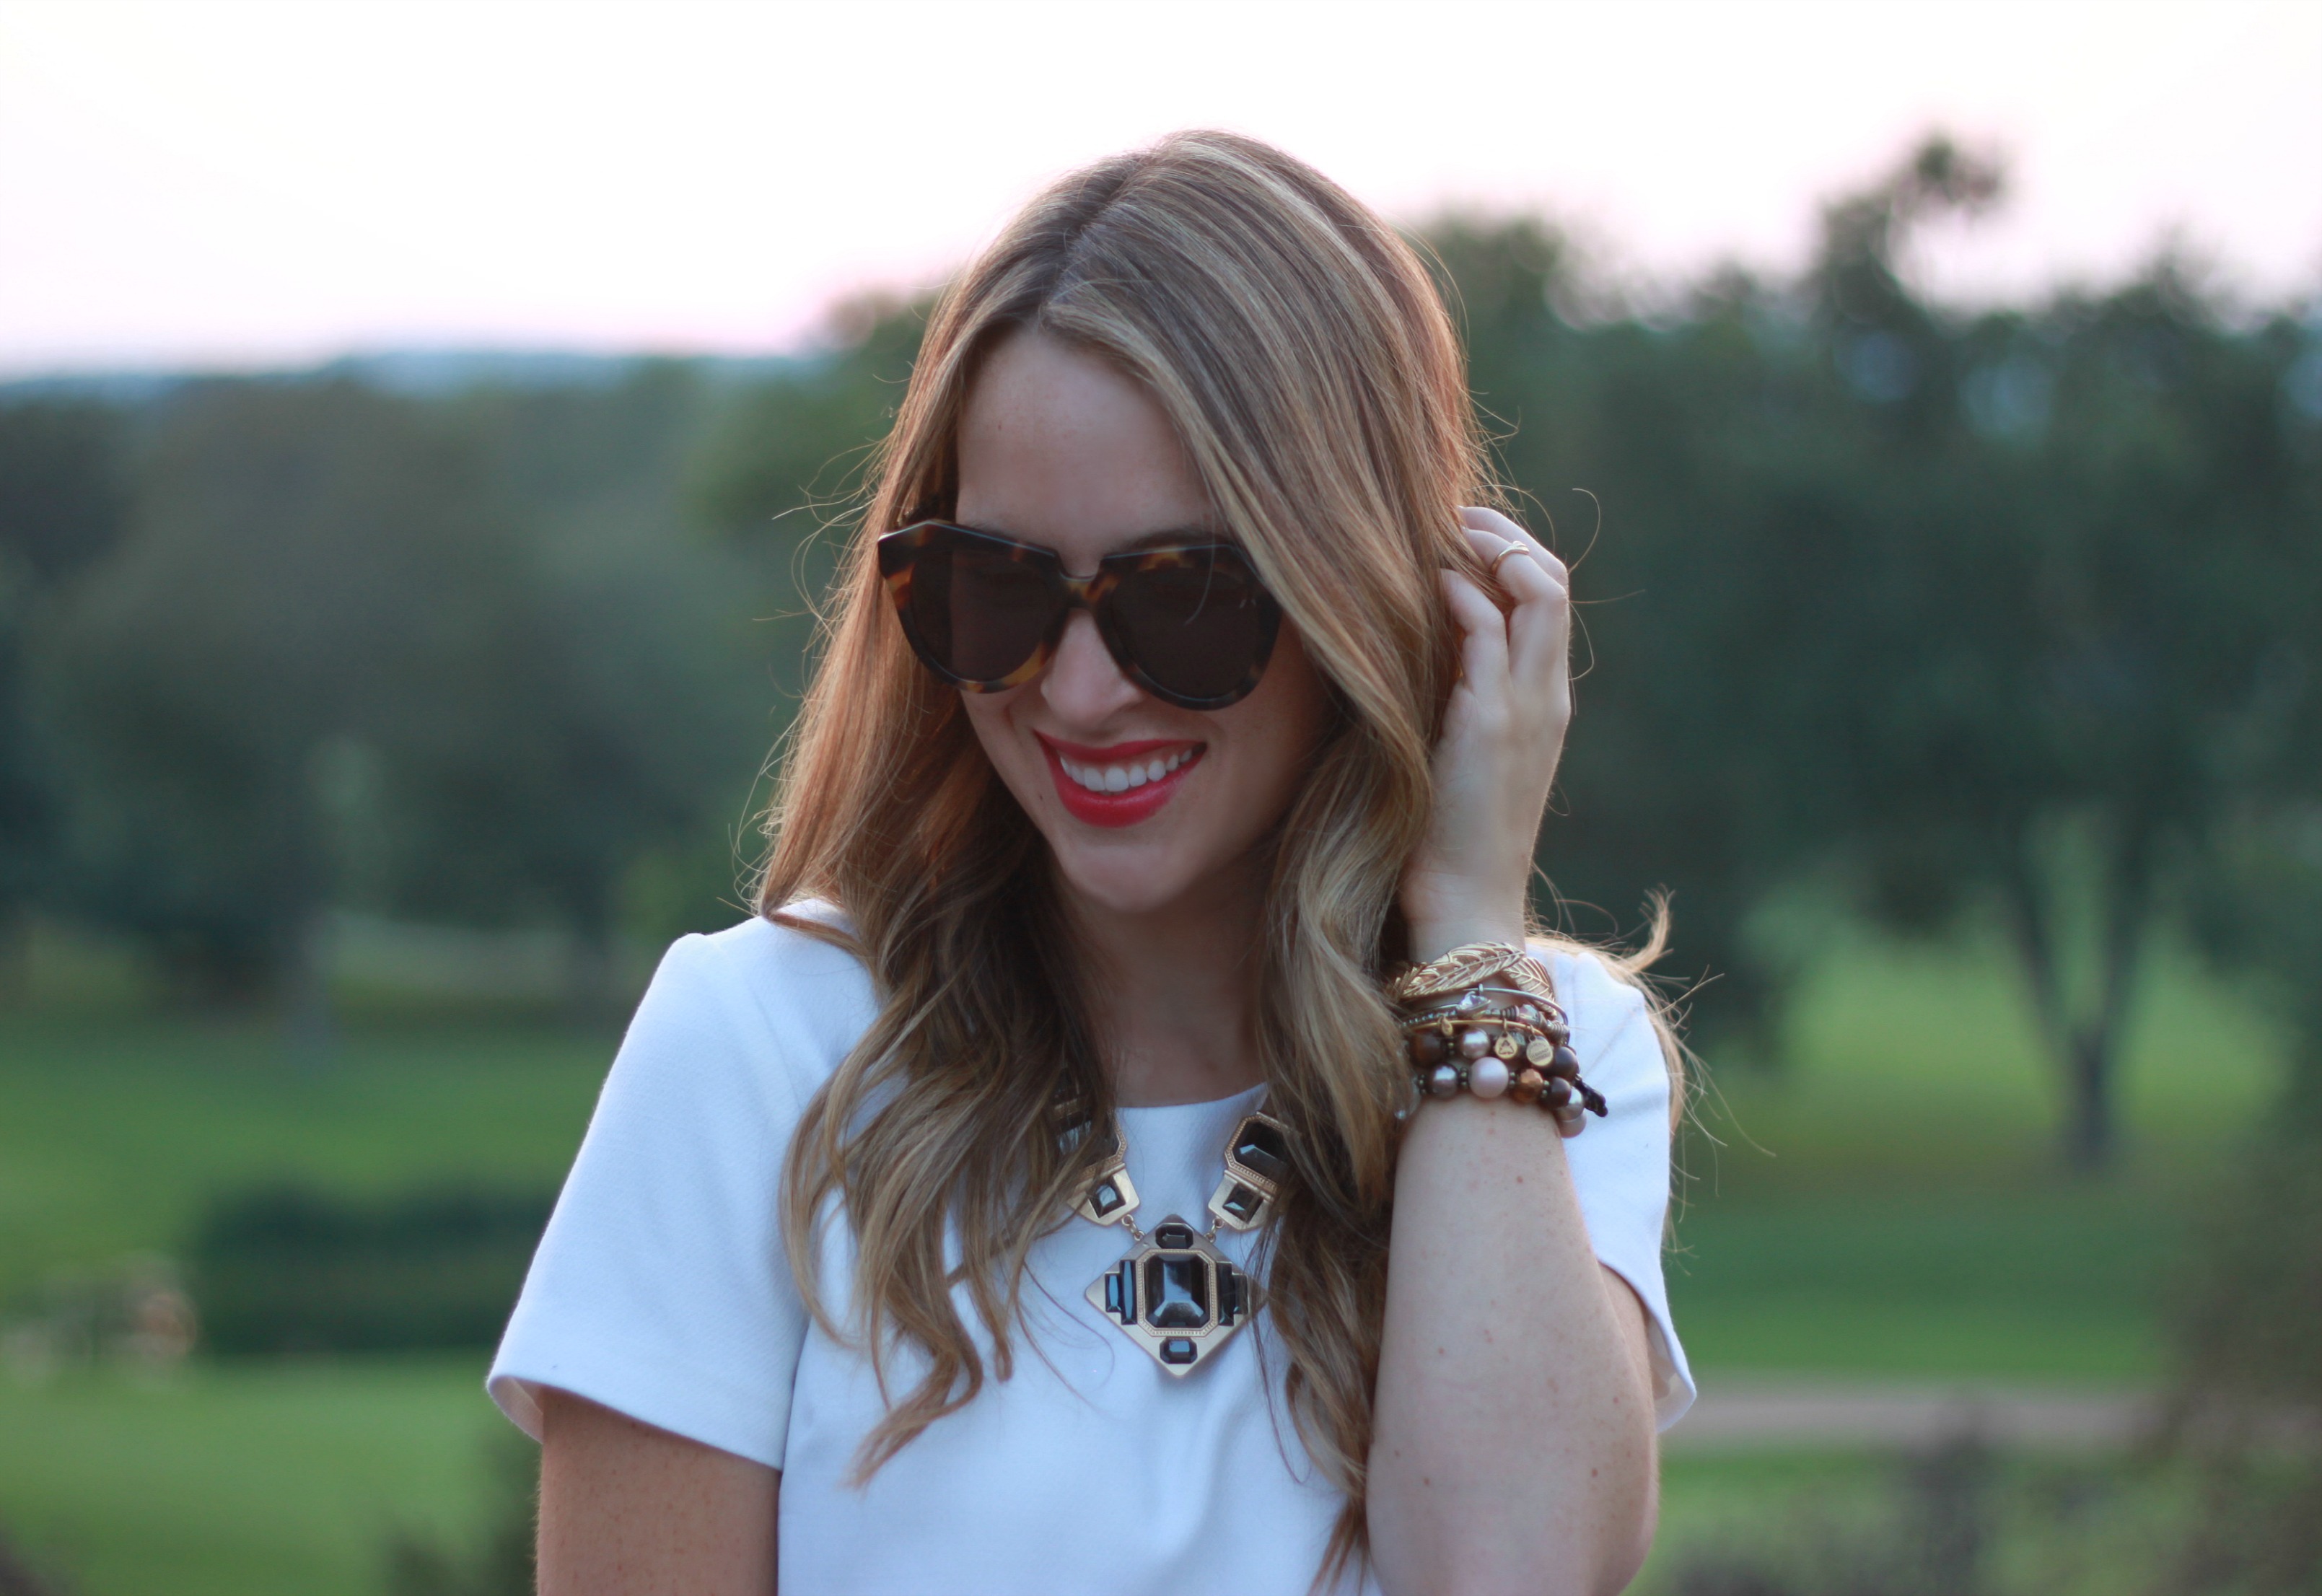 Oh So Glam: Statement Necklace